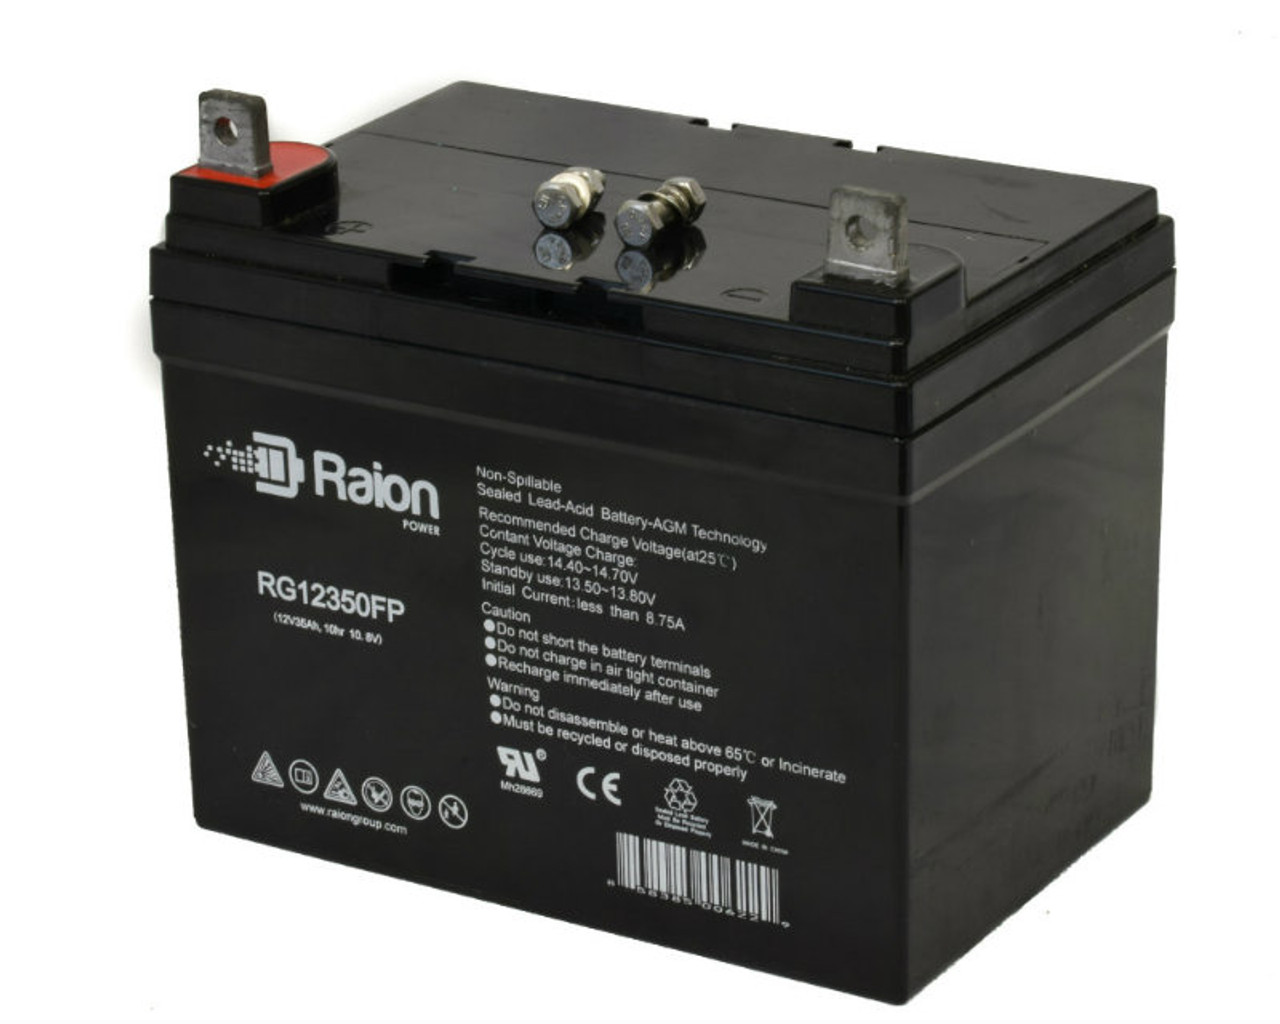 Raion Power Replacement 12V 35Ah RG12350FP Battery for BB BPL33-12